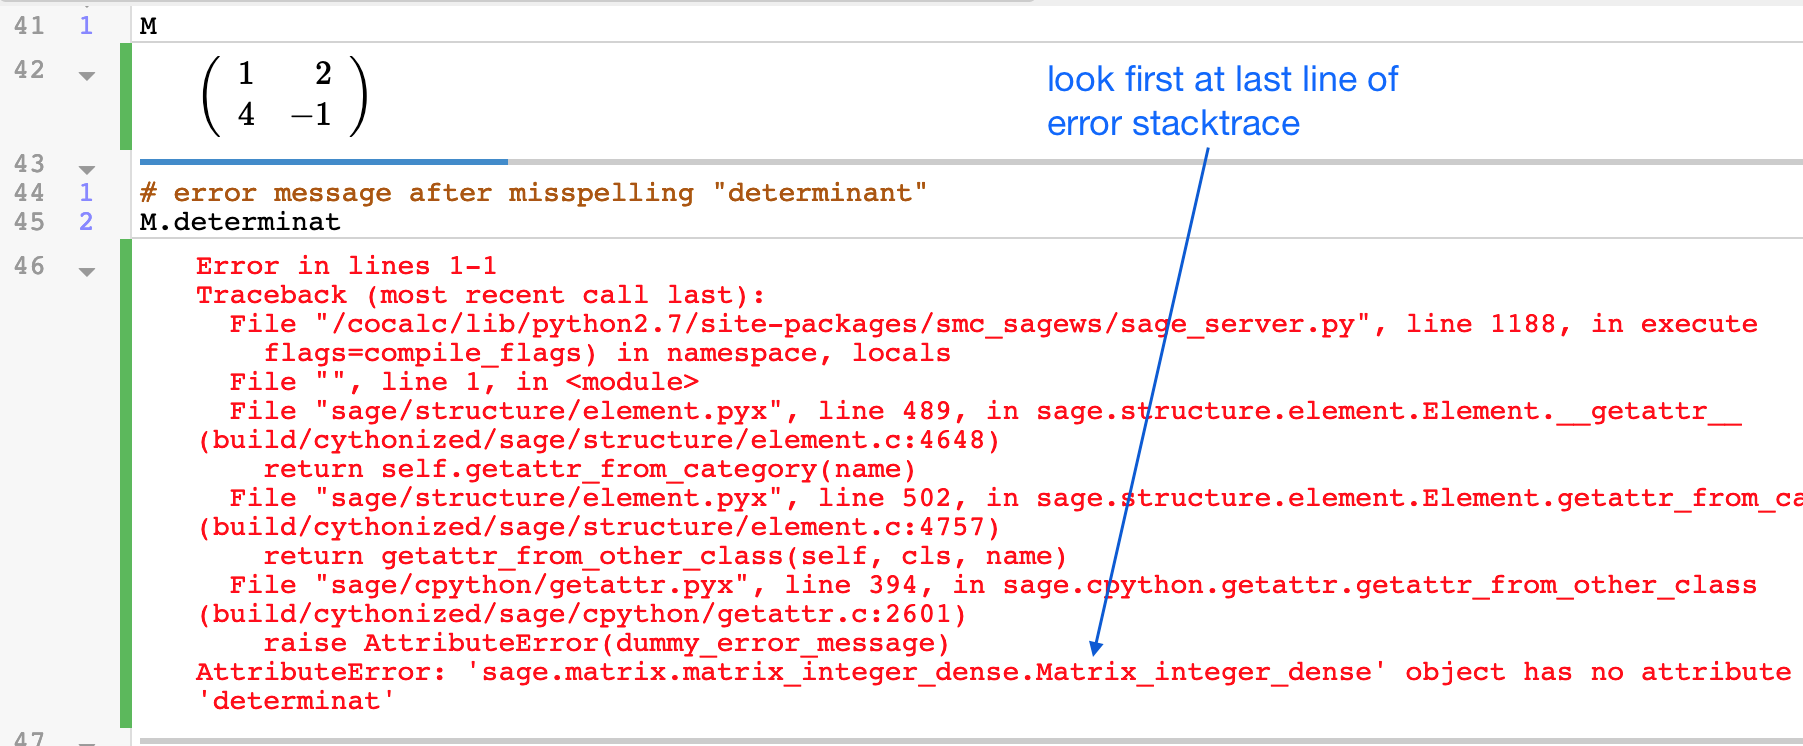 stacktrace from an error